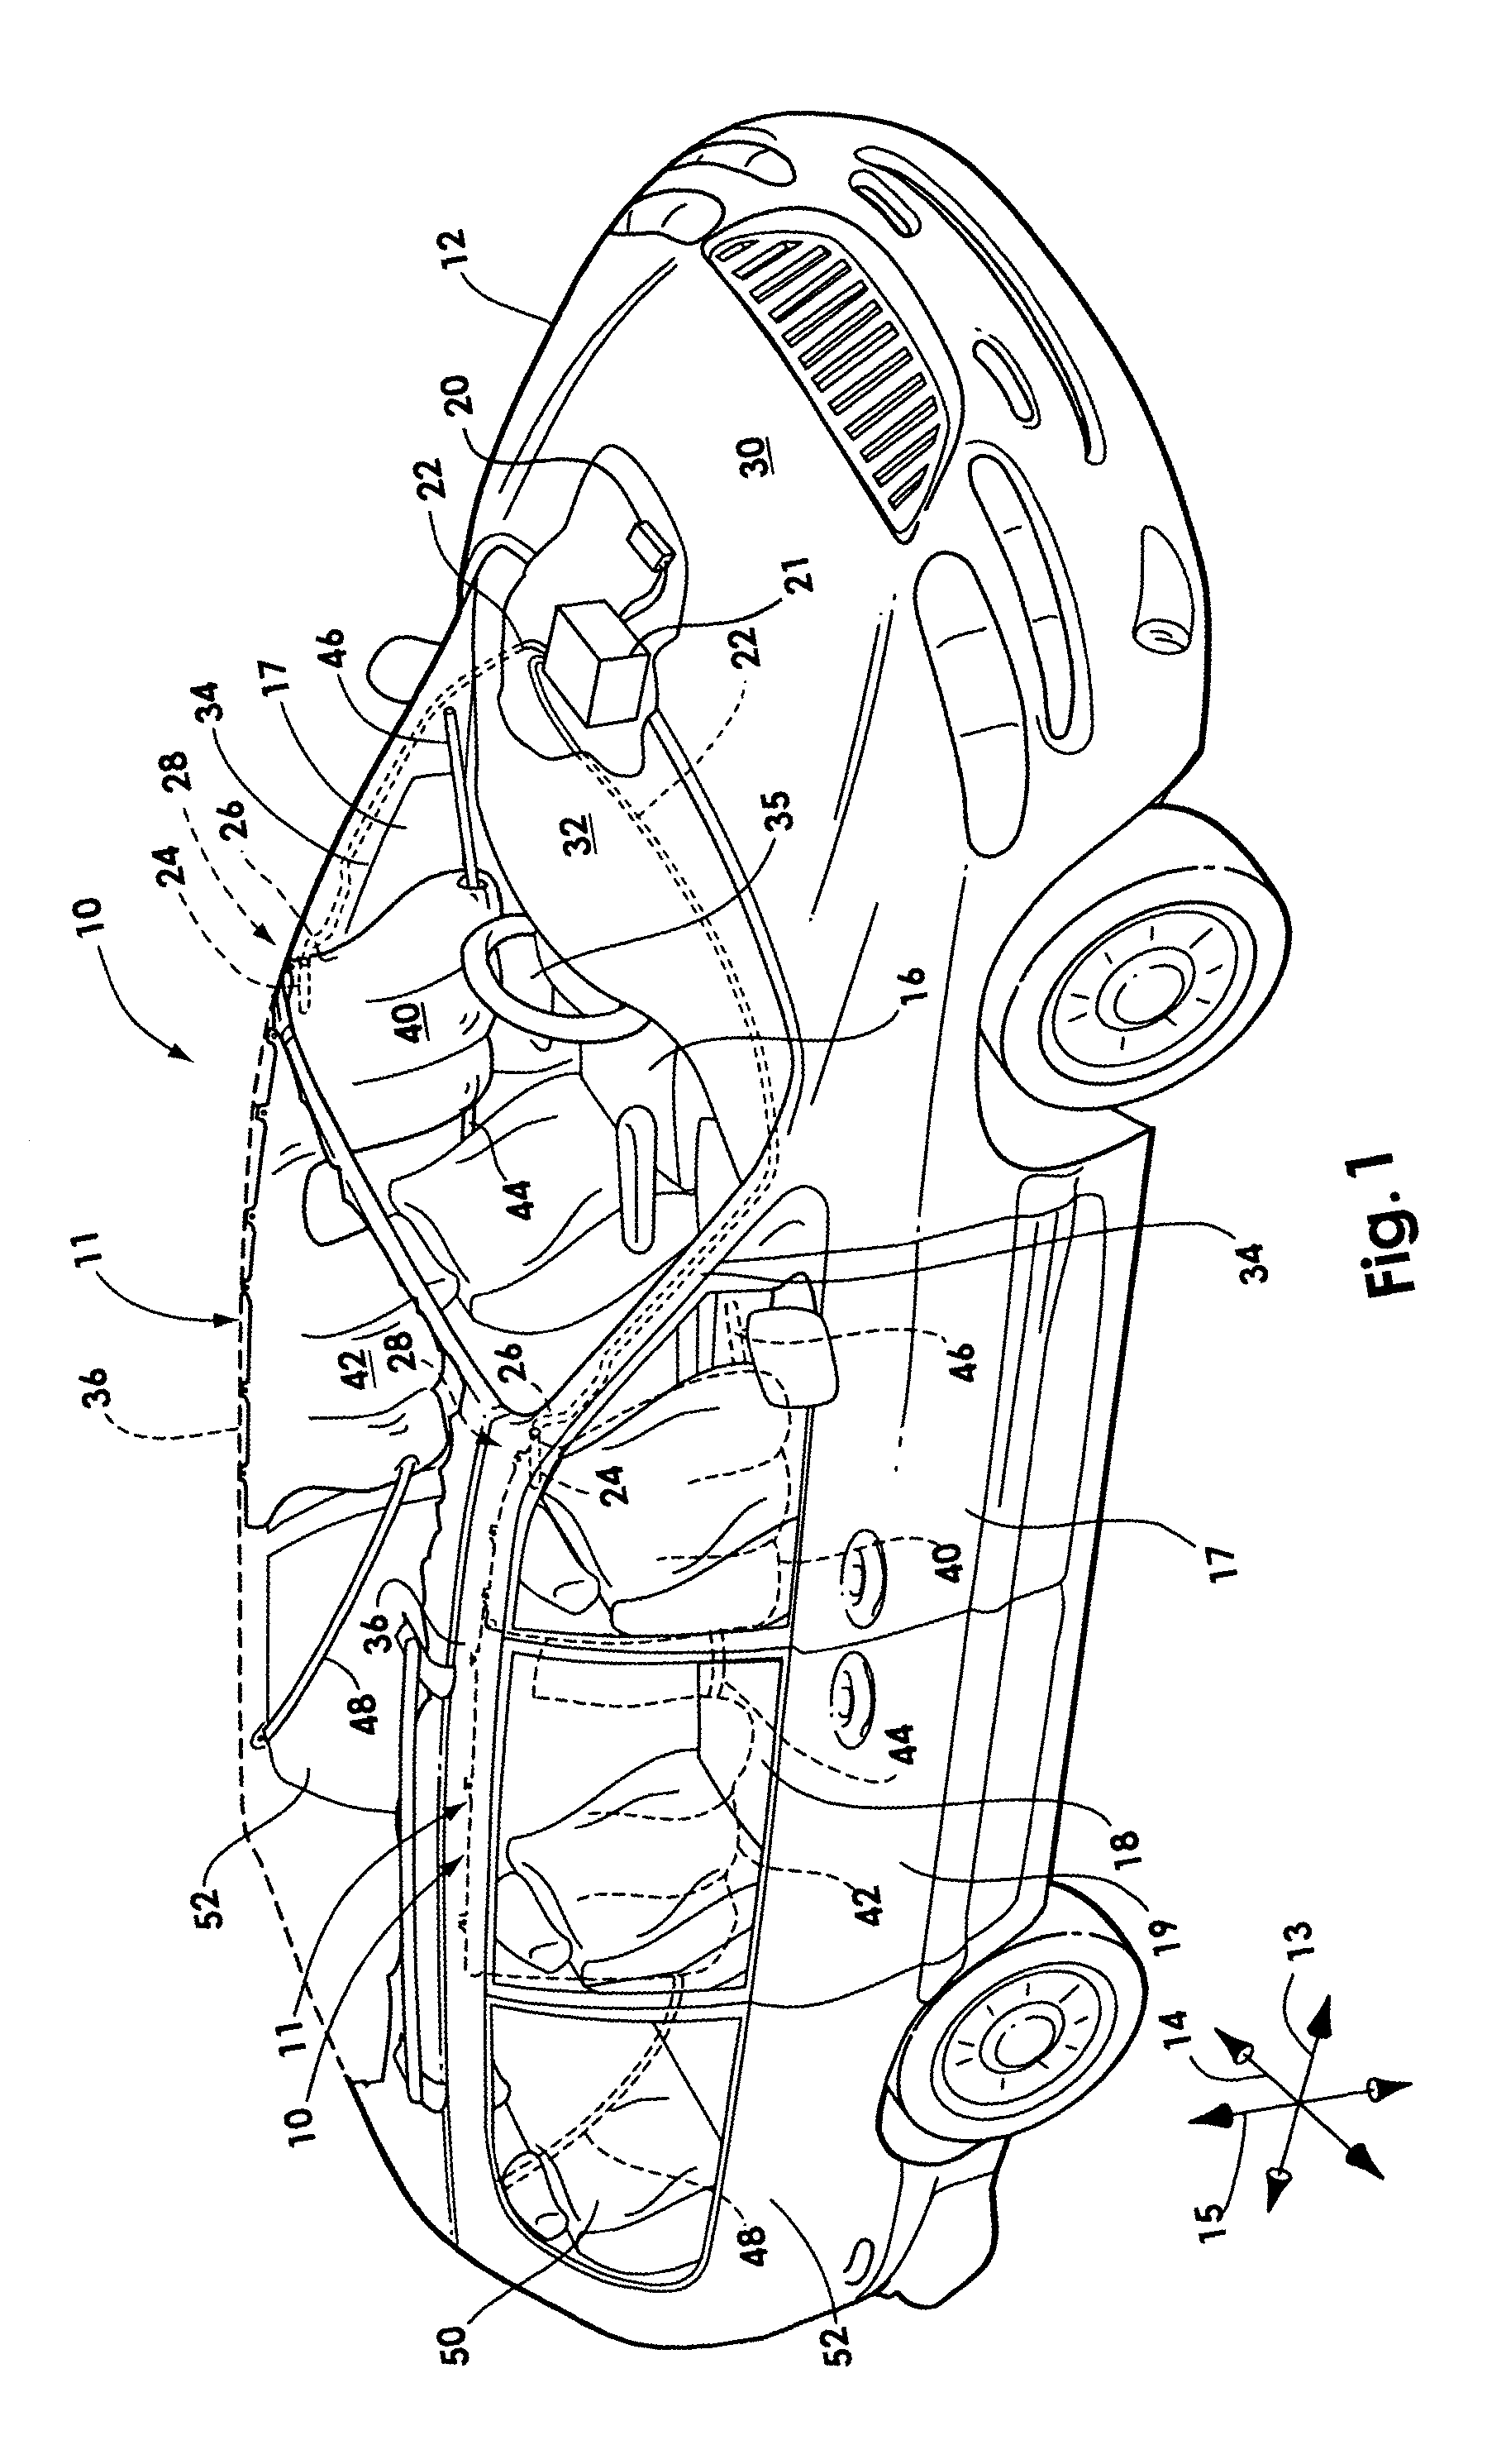 Airbag initiator cover attachment apparatus and method